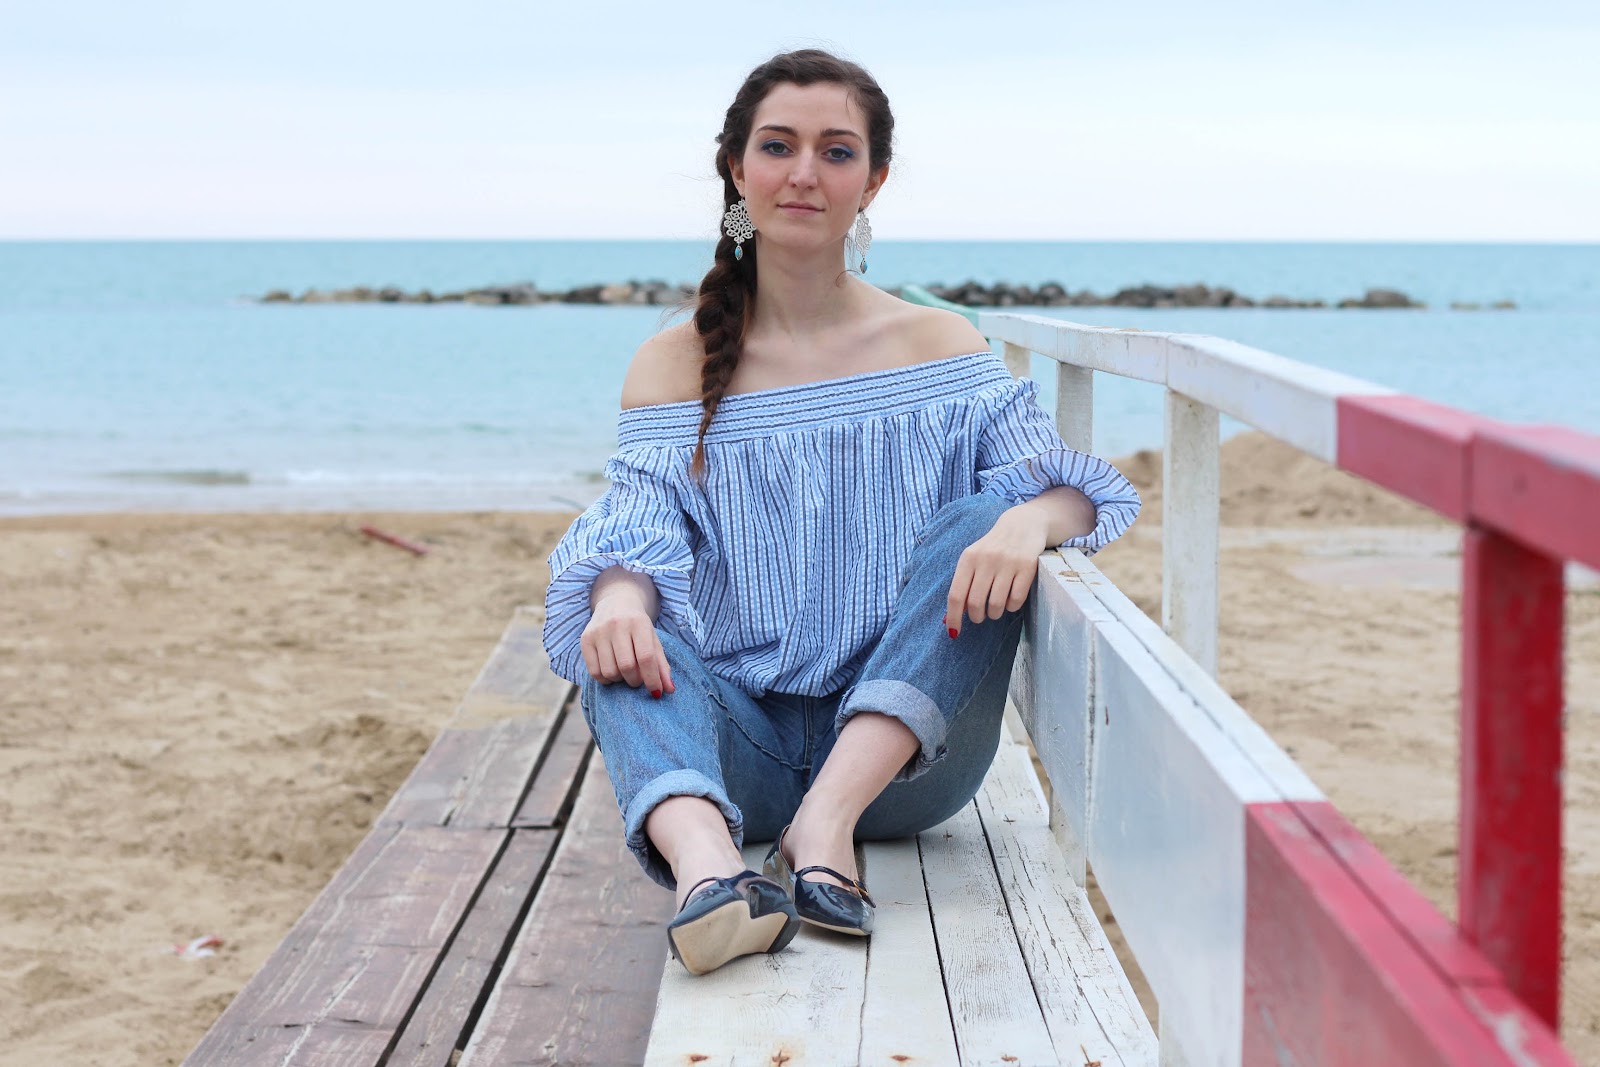 fashion style blogger outfit ootd italian girl italy vogue glamour pescara light blue bow off-the-shoulder top bluse chicwish trend denim jeans 90 calends blue bag borsa blu prospering flats ballerine shoes scarpe fabijoux earrings orecchini macramè braid hairstyle hair